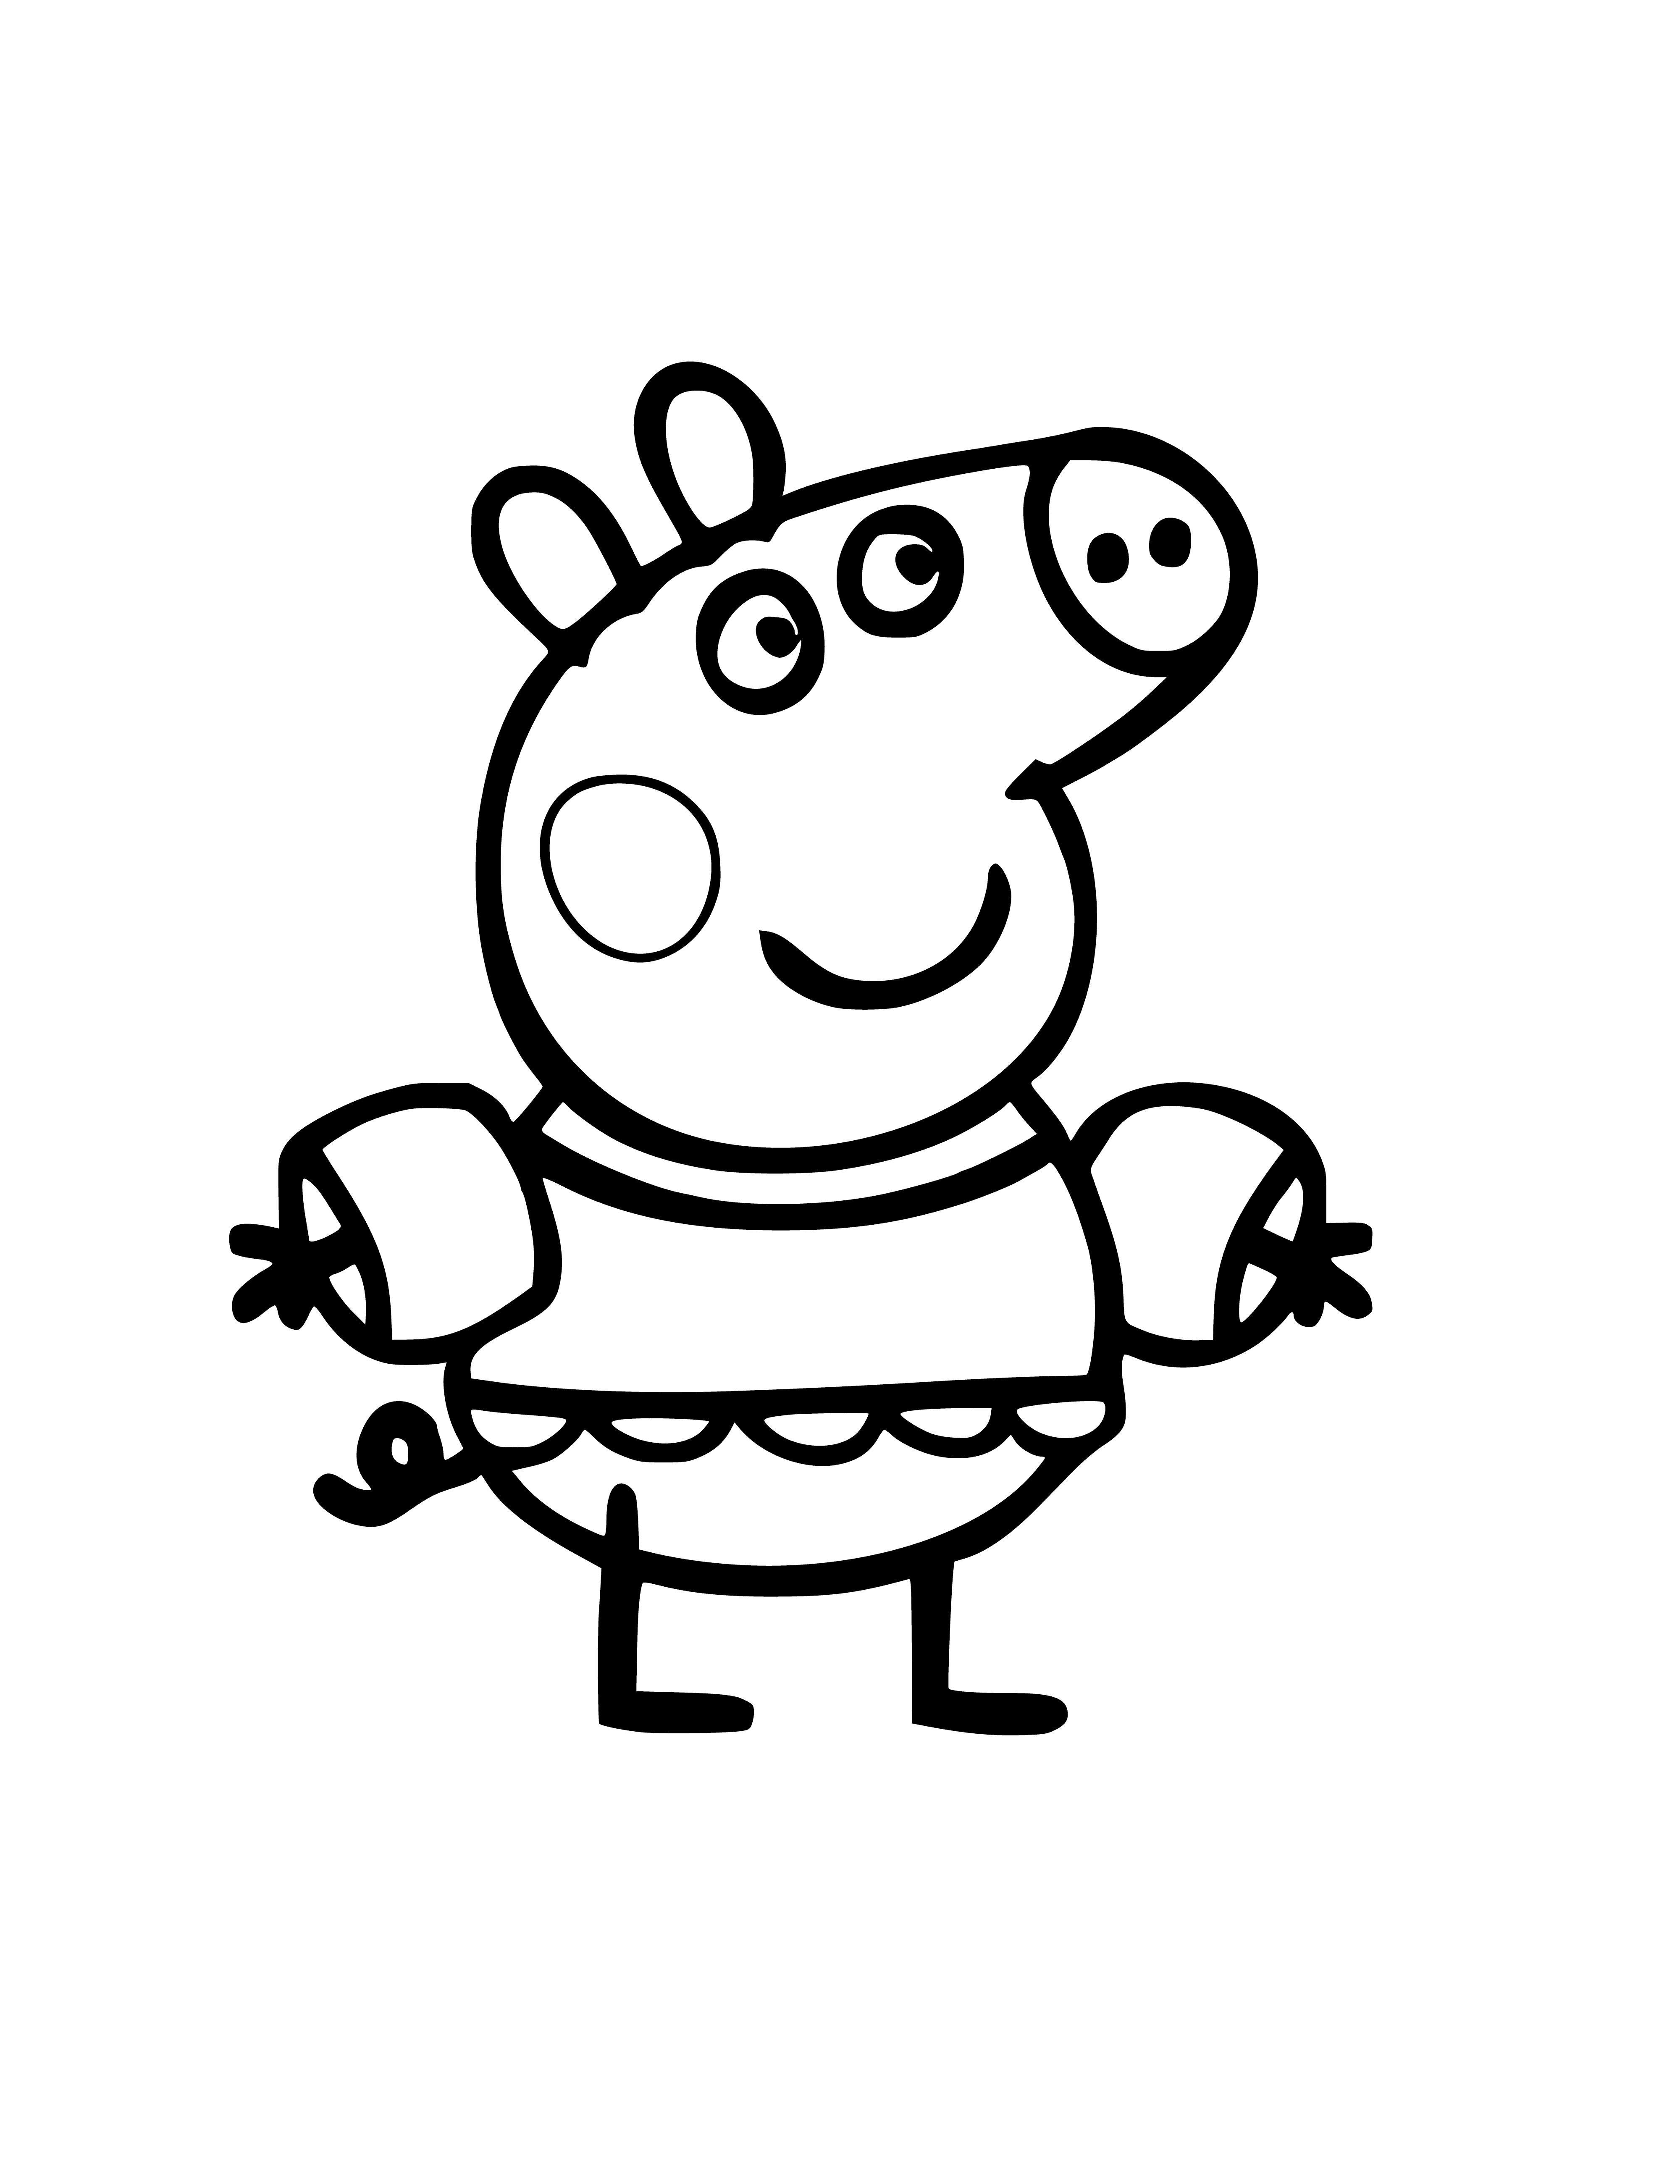 coloring page: A little girl pig in a pool wearing a blue bathing suit with armbands. Smiling happily.